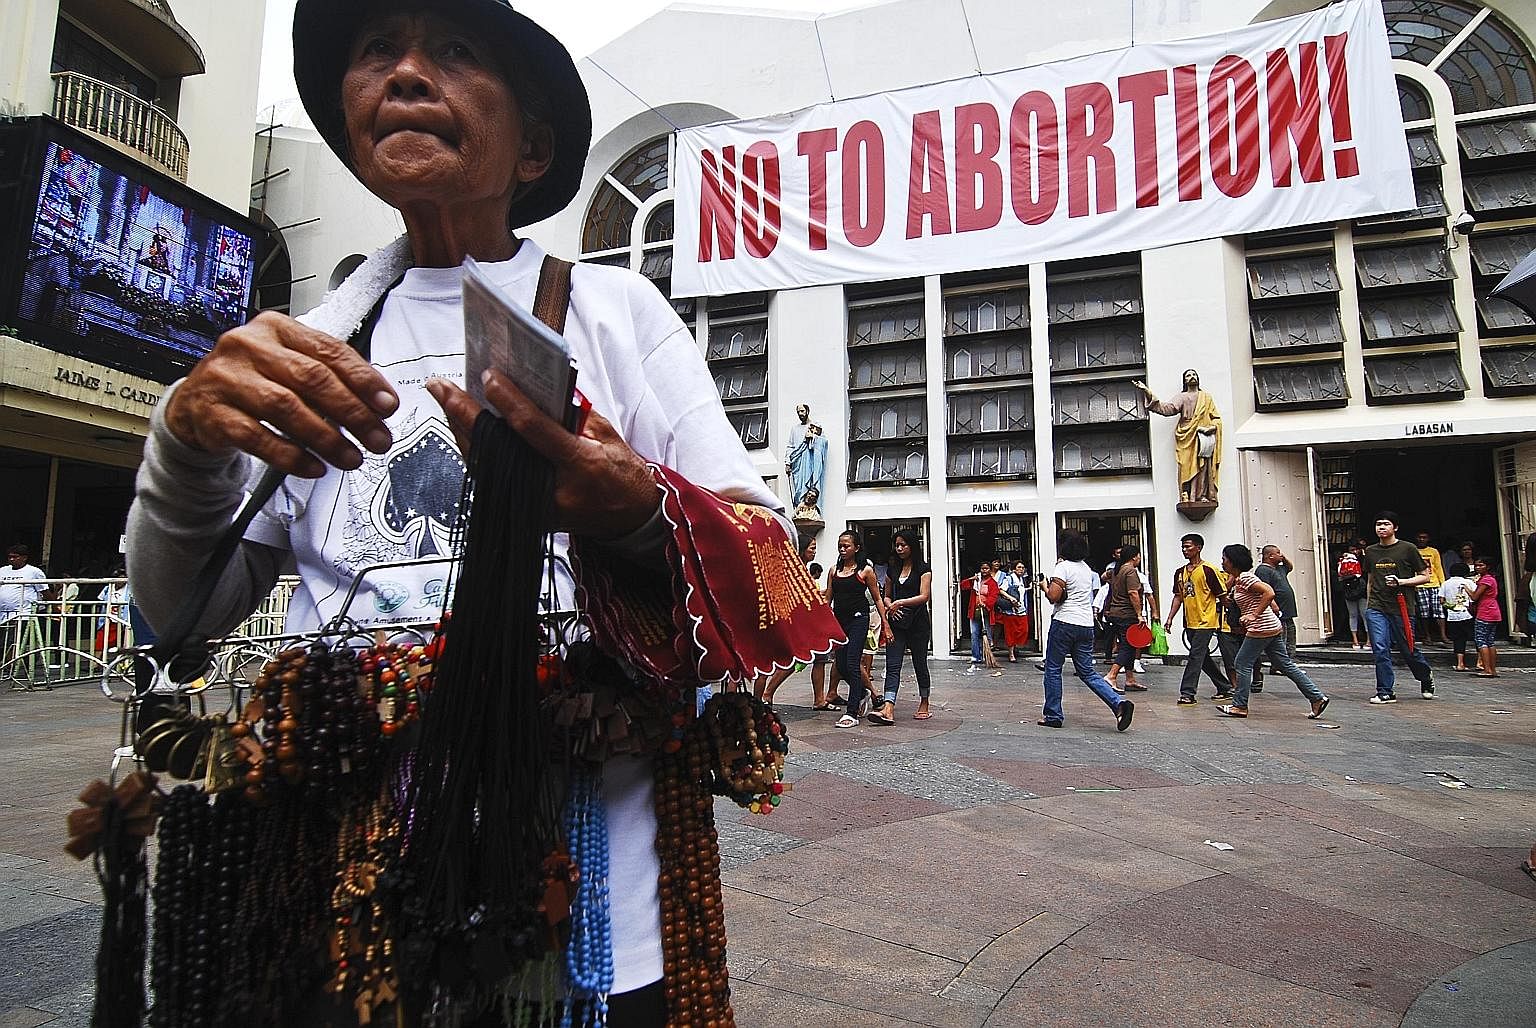 An anti-abortion sign on the wall of the Minor Basilica of the Black Nazarene in Quiapo, Manila. Vendors outside the church sell a dizzying range of goods, including the banned anti-ulcer drug Cytotec, known to induce miscarriage. That the "abortion 